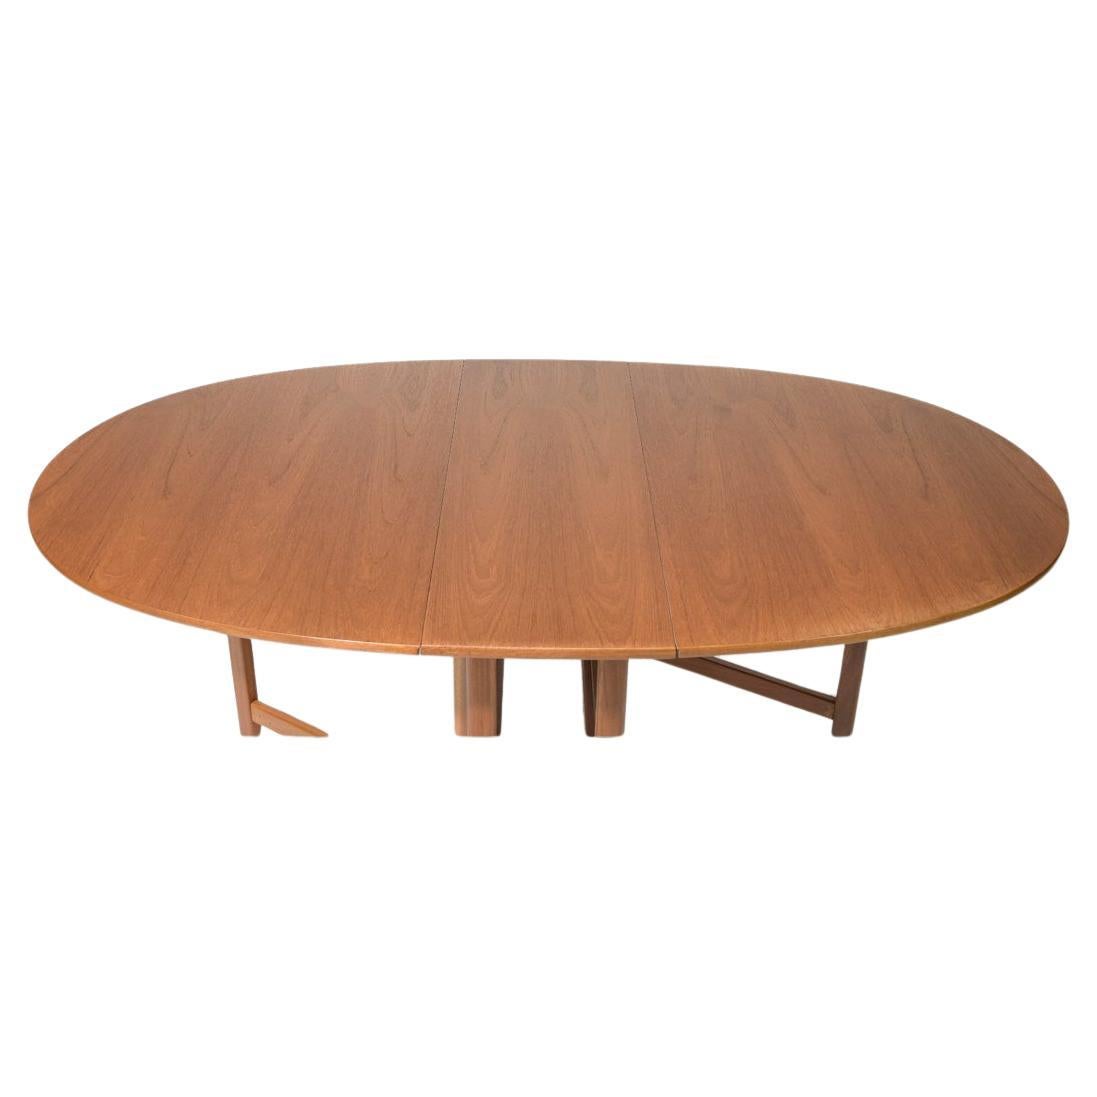 Danish Modern Teak oval Drop Leaf folding dining Table by Nathan Furniture made in Denmark. Very clean table with 2 fold down leaves ready for use. Seats 4-6 chairs Located in Brooklyn NYC.

Table folded is 39” wide x 13” deep x 29” tall 
Table